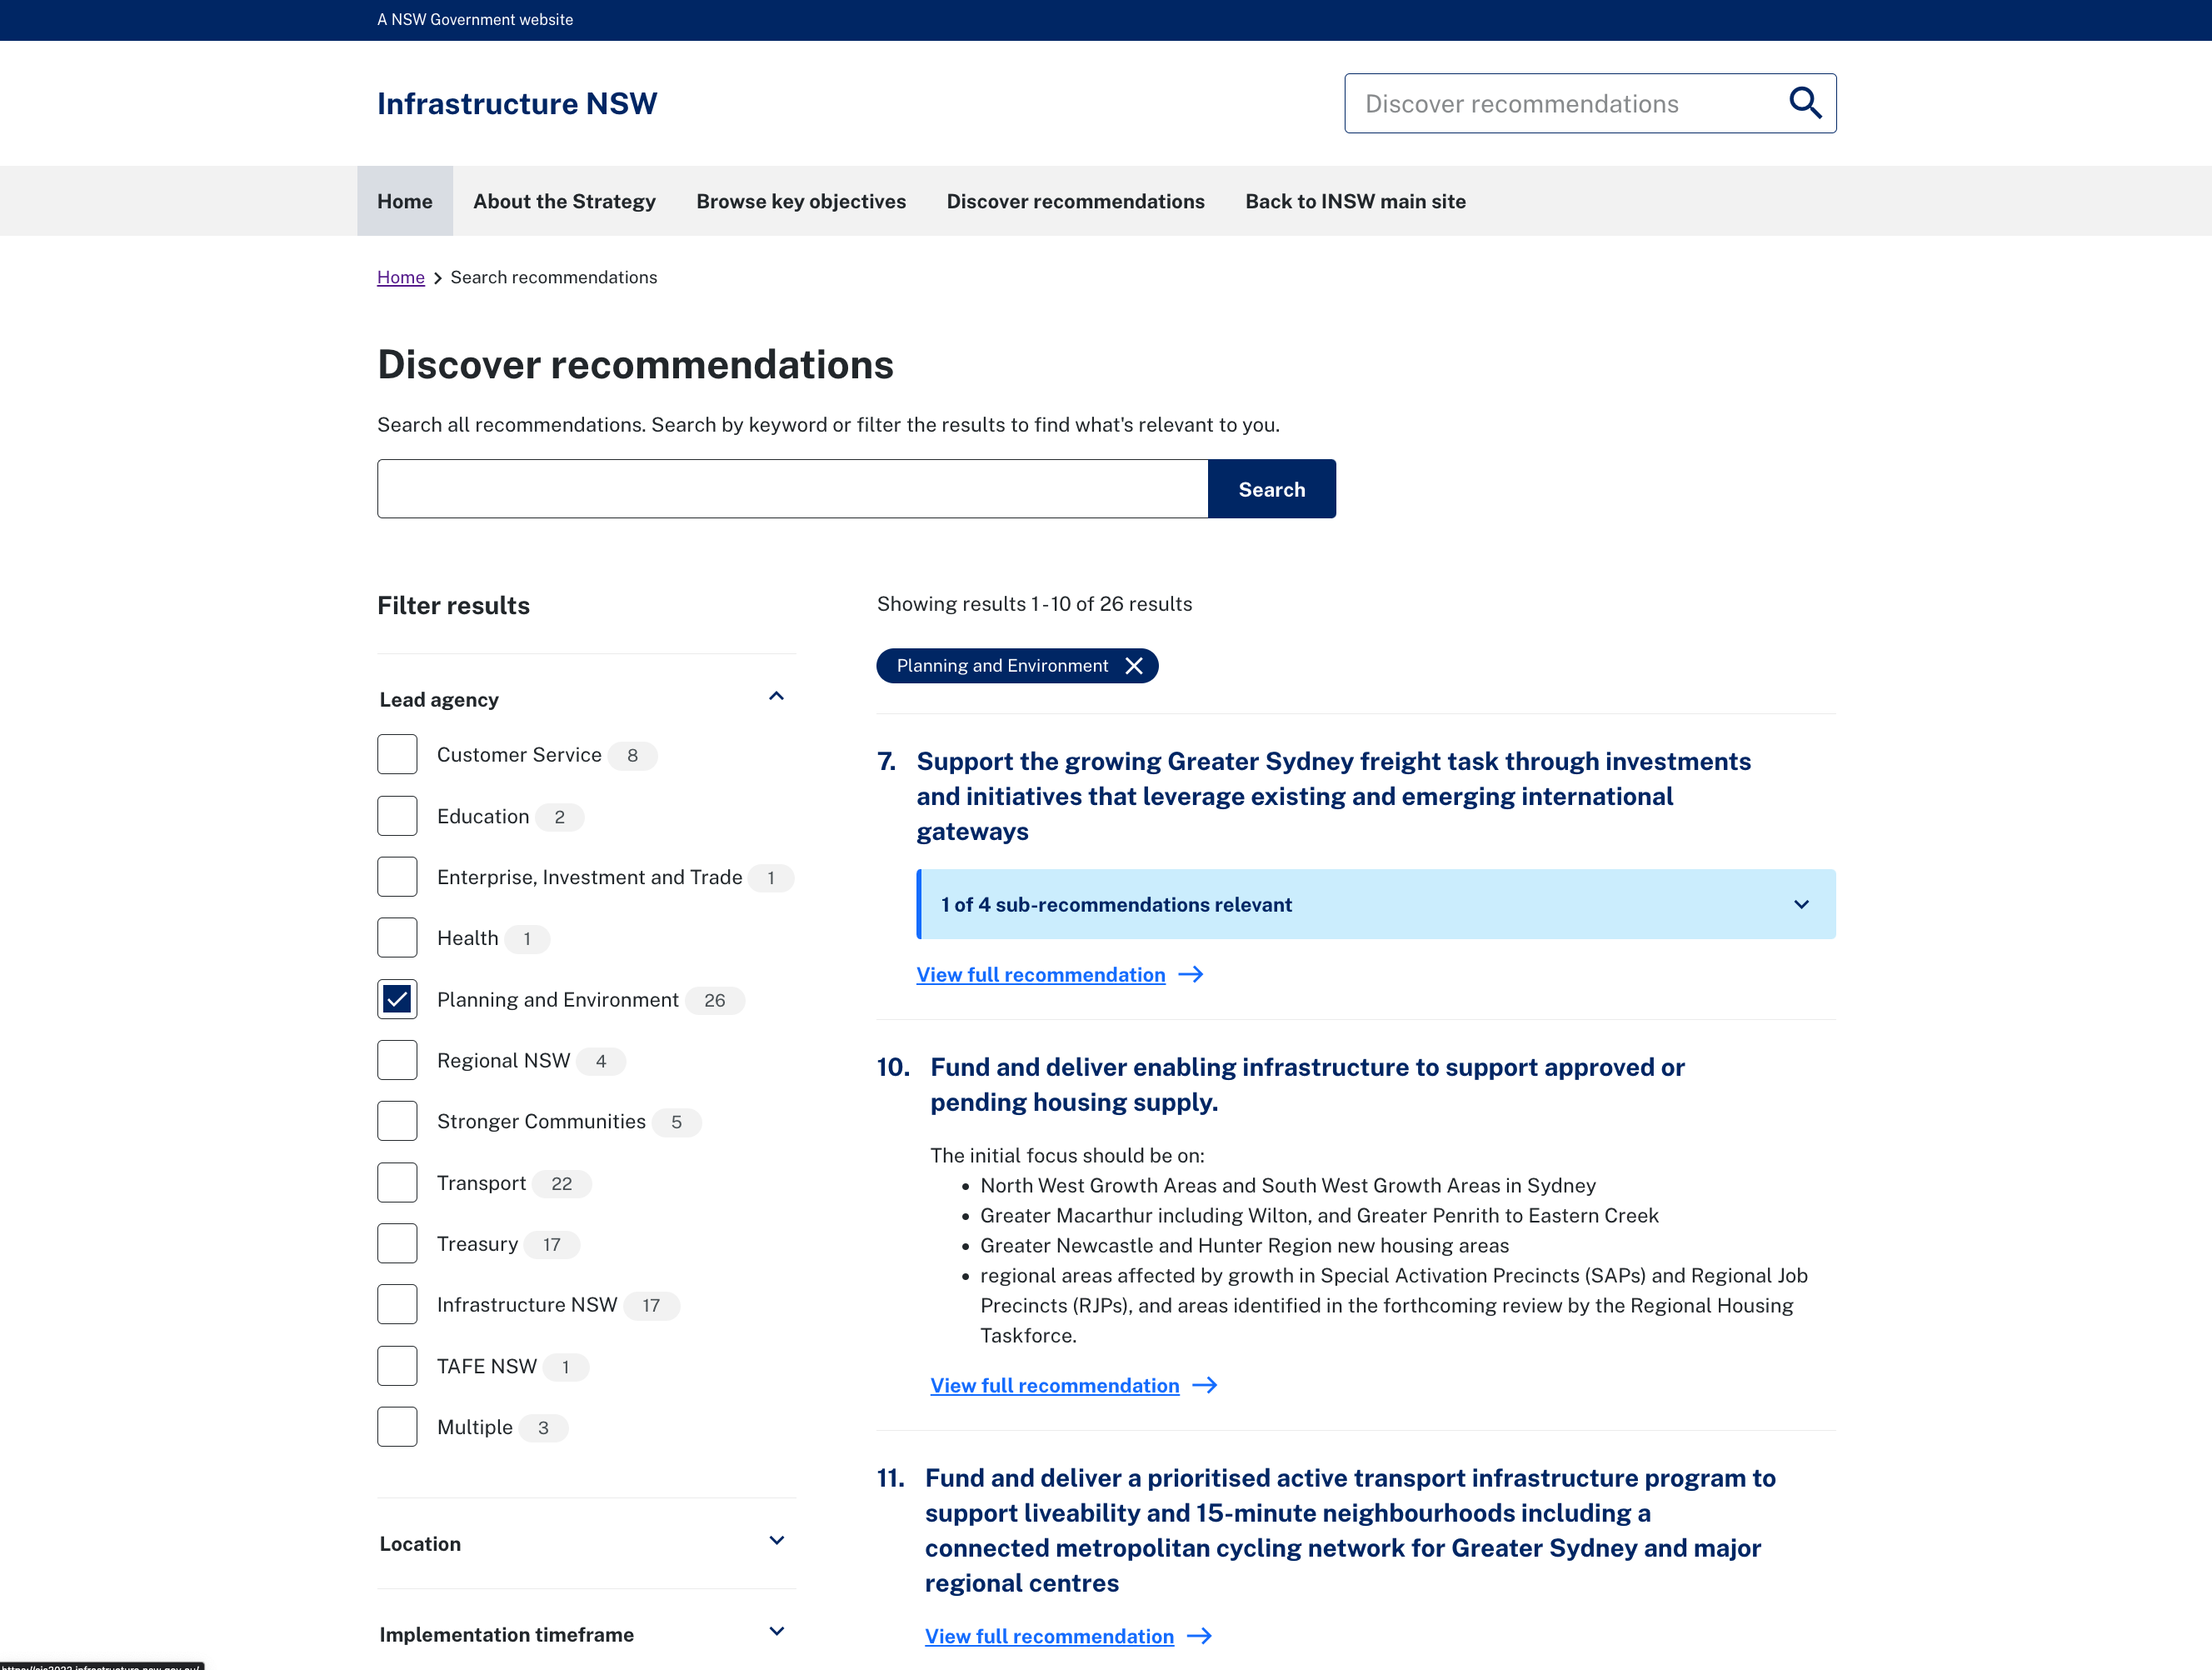 The recommendations page from the State Infrastructure Strategy website